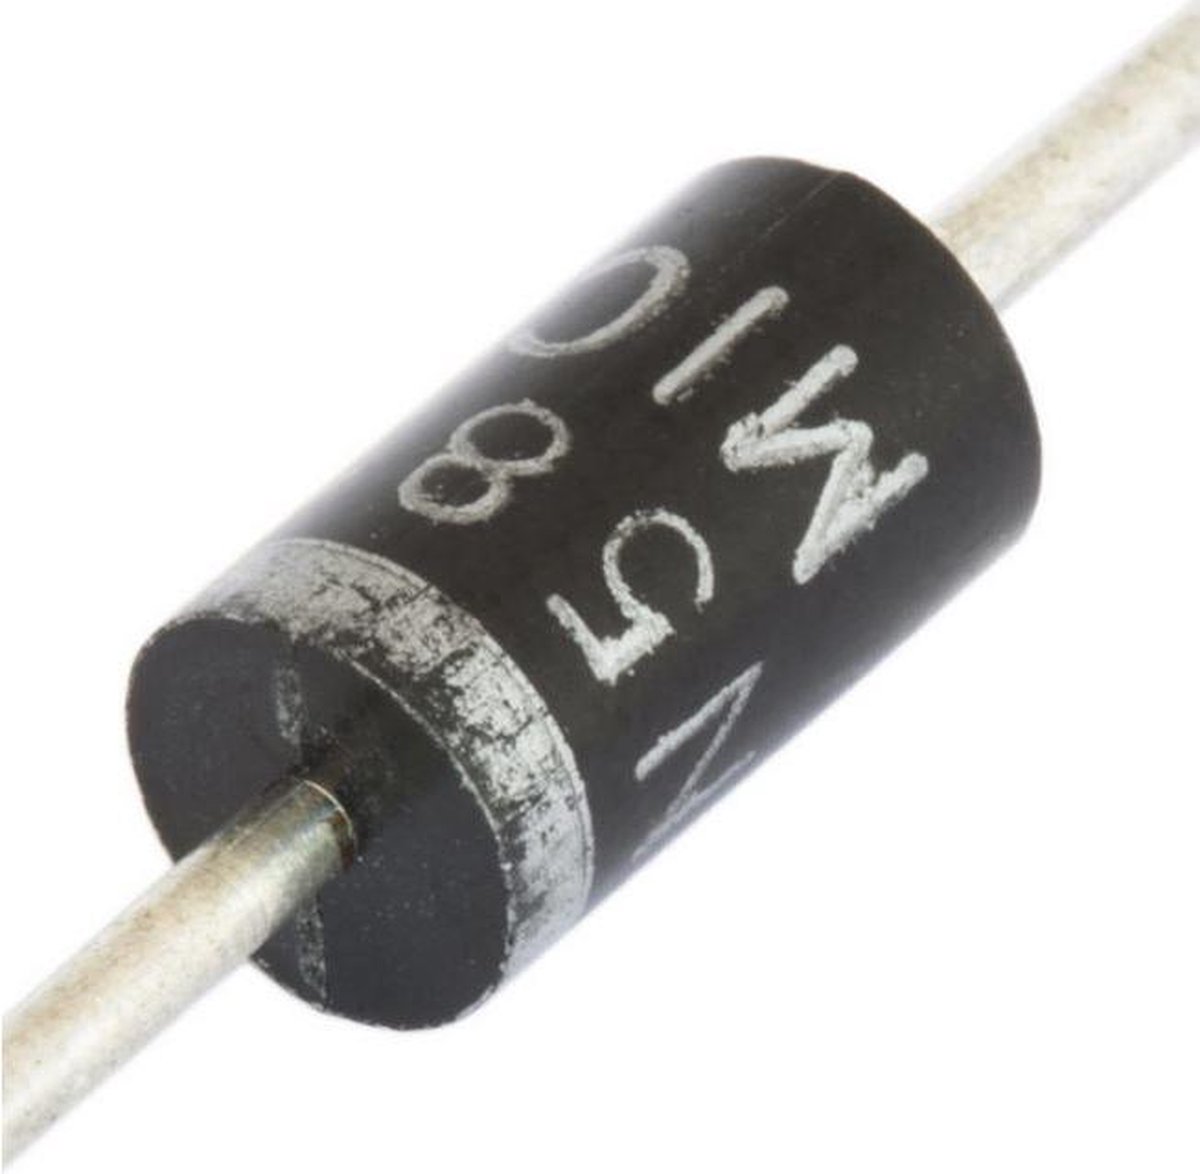 UF5404 400V 3A Ultra-Fast Recovery Diode, verpakt per 5 stuks - Texas Instruments